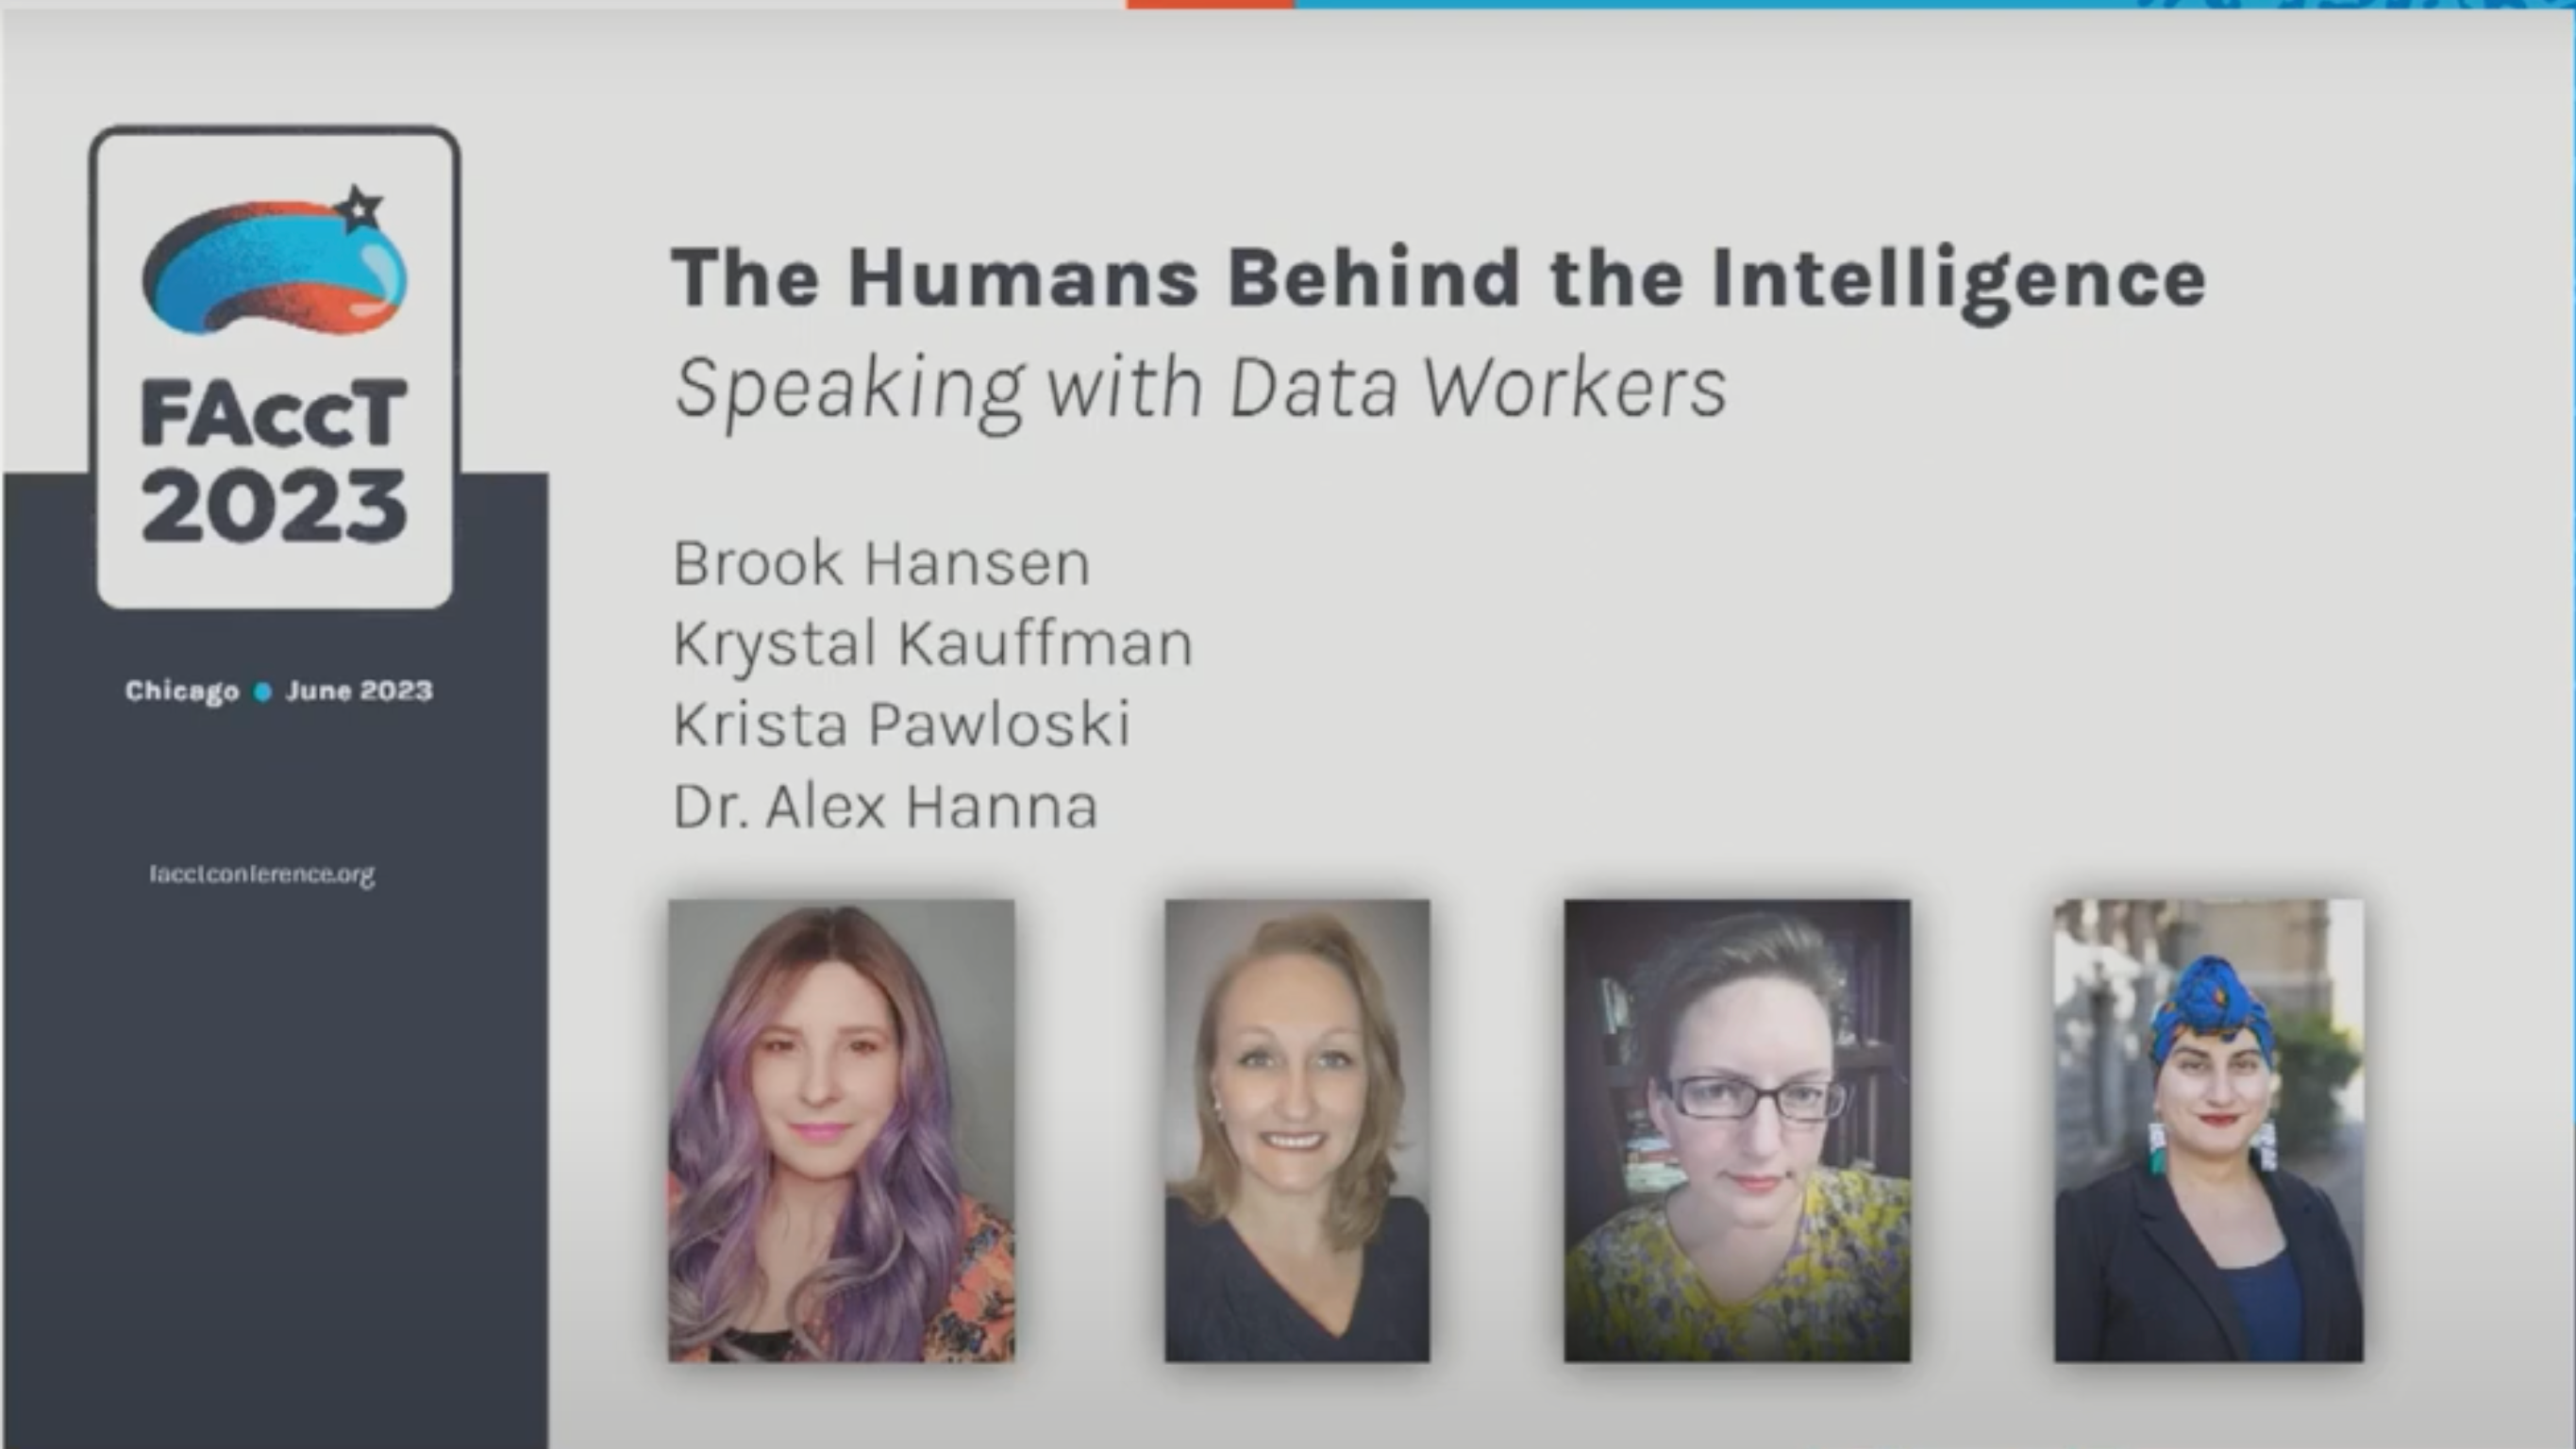 Screen capture of a presentation slide featuring the headline, "The Humans Behind the Intelligence: Speaking with Data Workers." The logo for FAccT is on the upper left, featuring a blue-striped oblong shape like a jellybean with a black five-pointed star on top. The names of the presenters are listed: Brook Hansen, Krystal Kauffman, Krista Pawloski and Dr. Alex Hanna. Small headshots of each person line the bottom. Brook Hansen: A white woman with long, lavender-colored hair looks at the camera. She is wearing a peach-colored shirt with a pattern of some kind. Krystal Kauffman: A white woman with medium-length blond hair. She is smiling and looking at the camera, and wears a black shirt. Krista Pawloski: A white woman with short brown hair looks at the camera. She is wearing glasses and a yellow patterned top. Alex Hanna: An Arab woman looks at the camera. She is wearing earrings, a blue headwrap, and a black blazer with blue shirt. She appears to be standing outside, with a wall and greenery in the background.